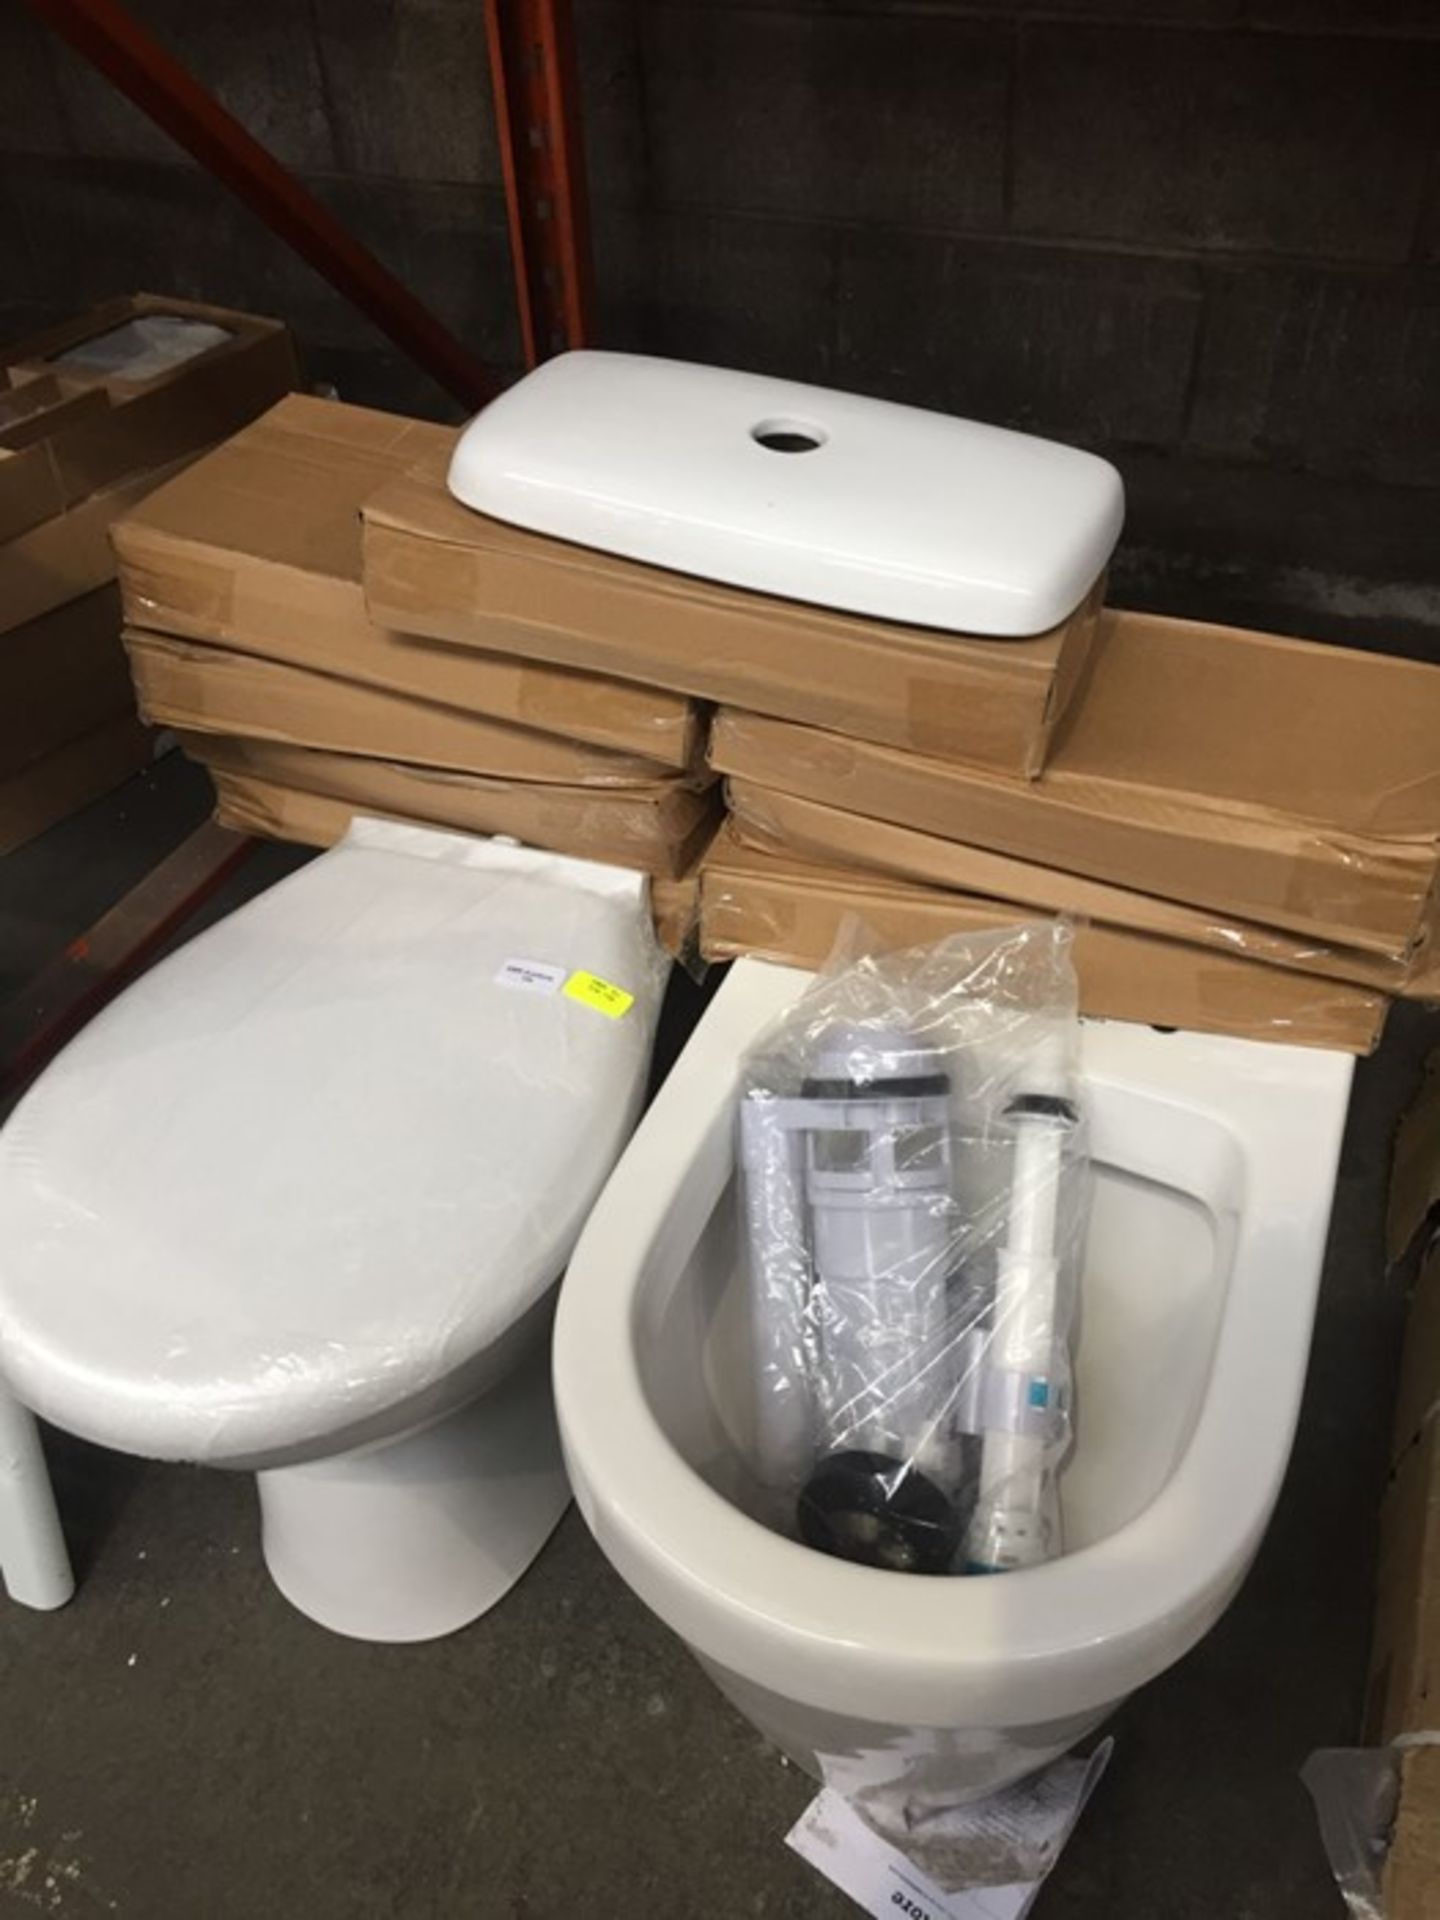 2 X TOILET PANS, SEAT, CISTERN LIDS & DUAL FLUSH CISTERN KIT. (PUBLIC VIEWING AVAILABLE AND HIGHLY